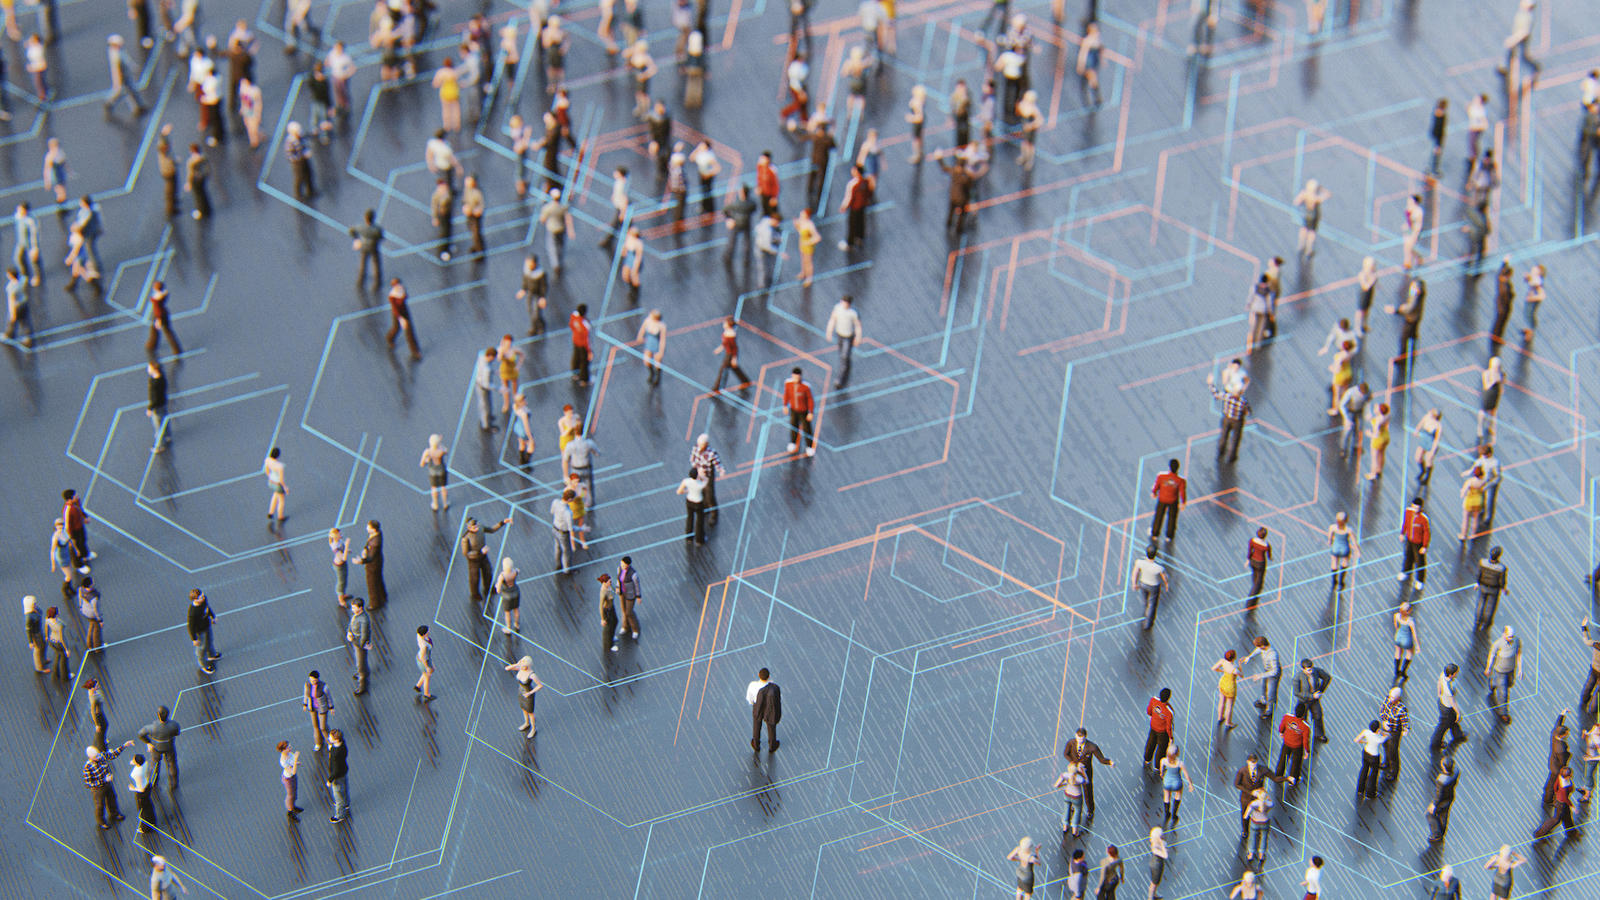 Crowds of people connected by hexagons